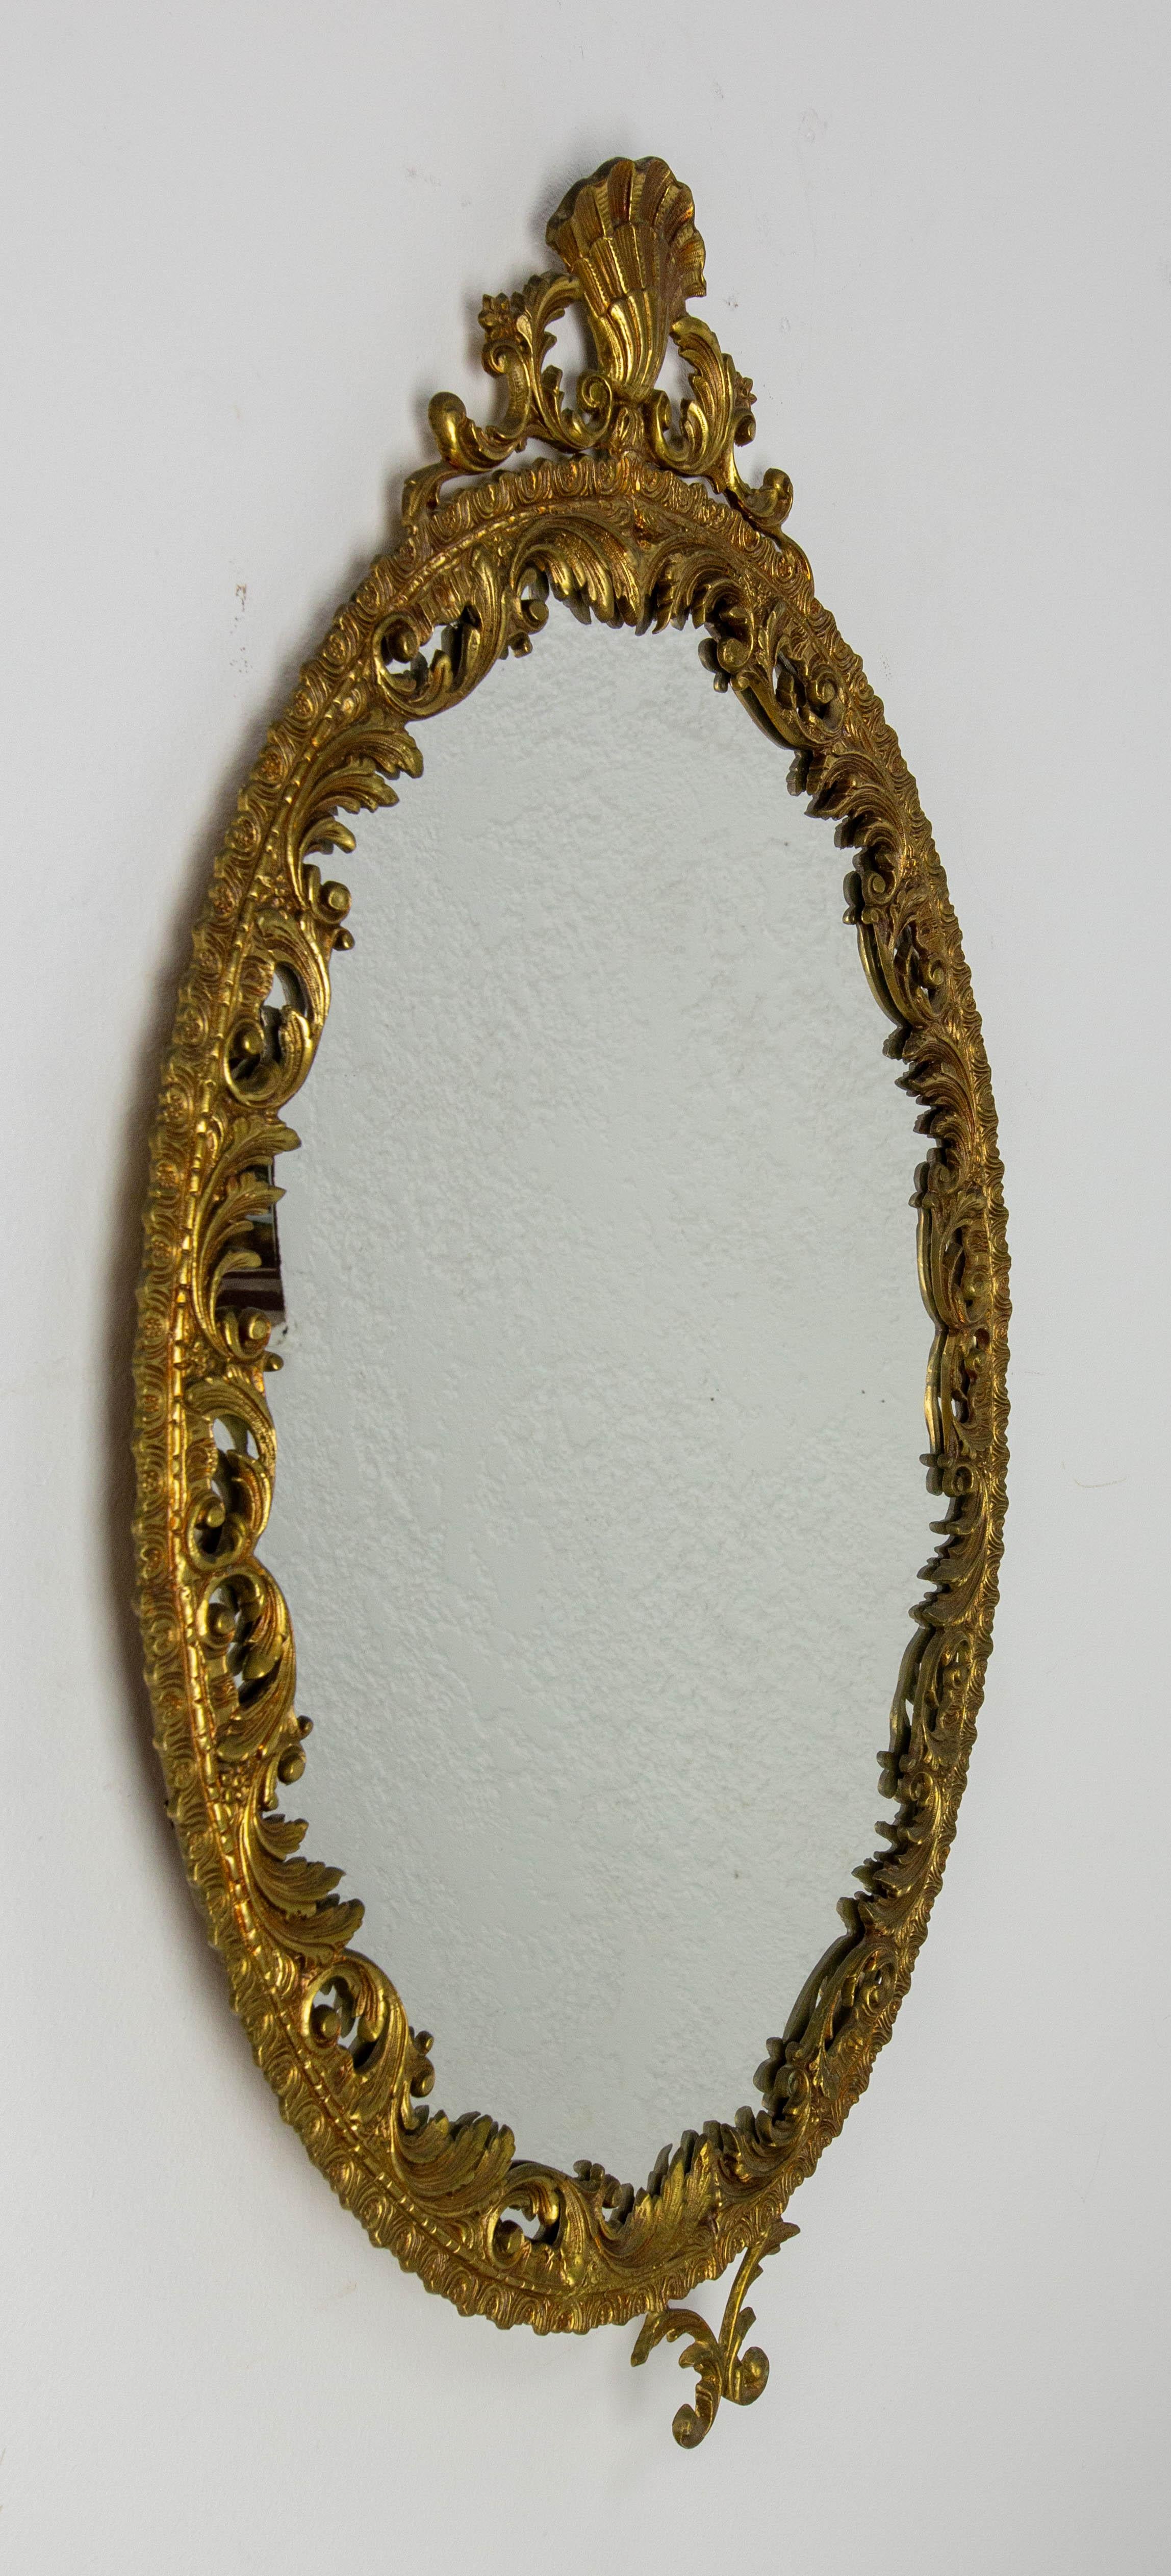 Rococo Revival French Wall Mirror Brass Frame with Rocaille Patterns Louis XV style, circa 1960